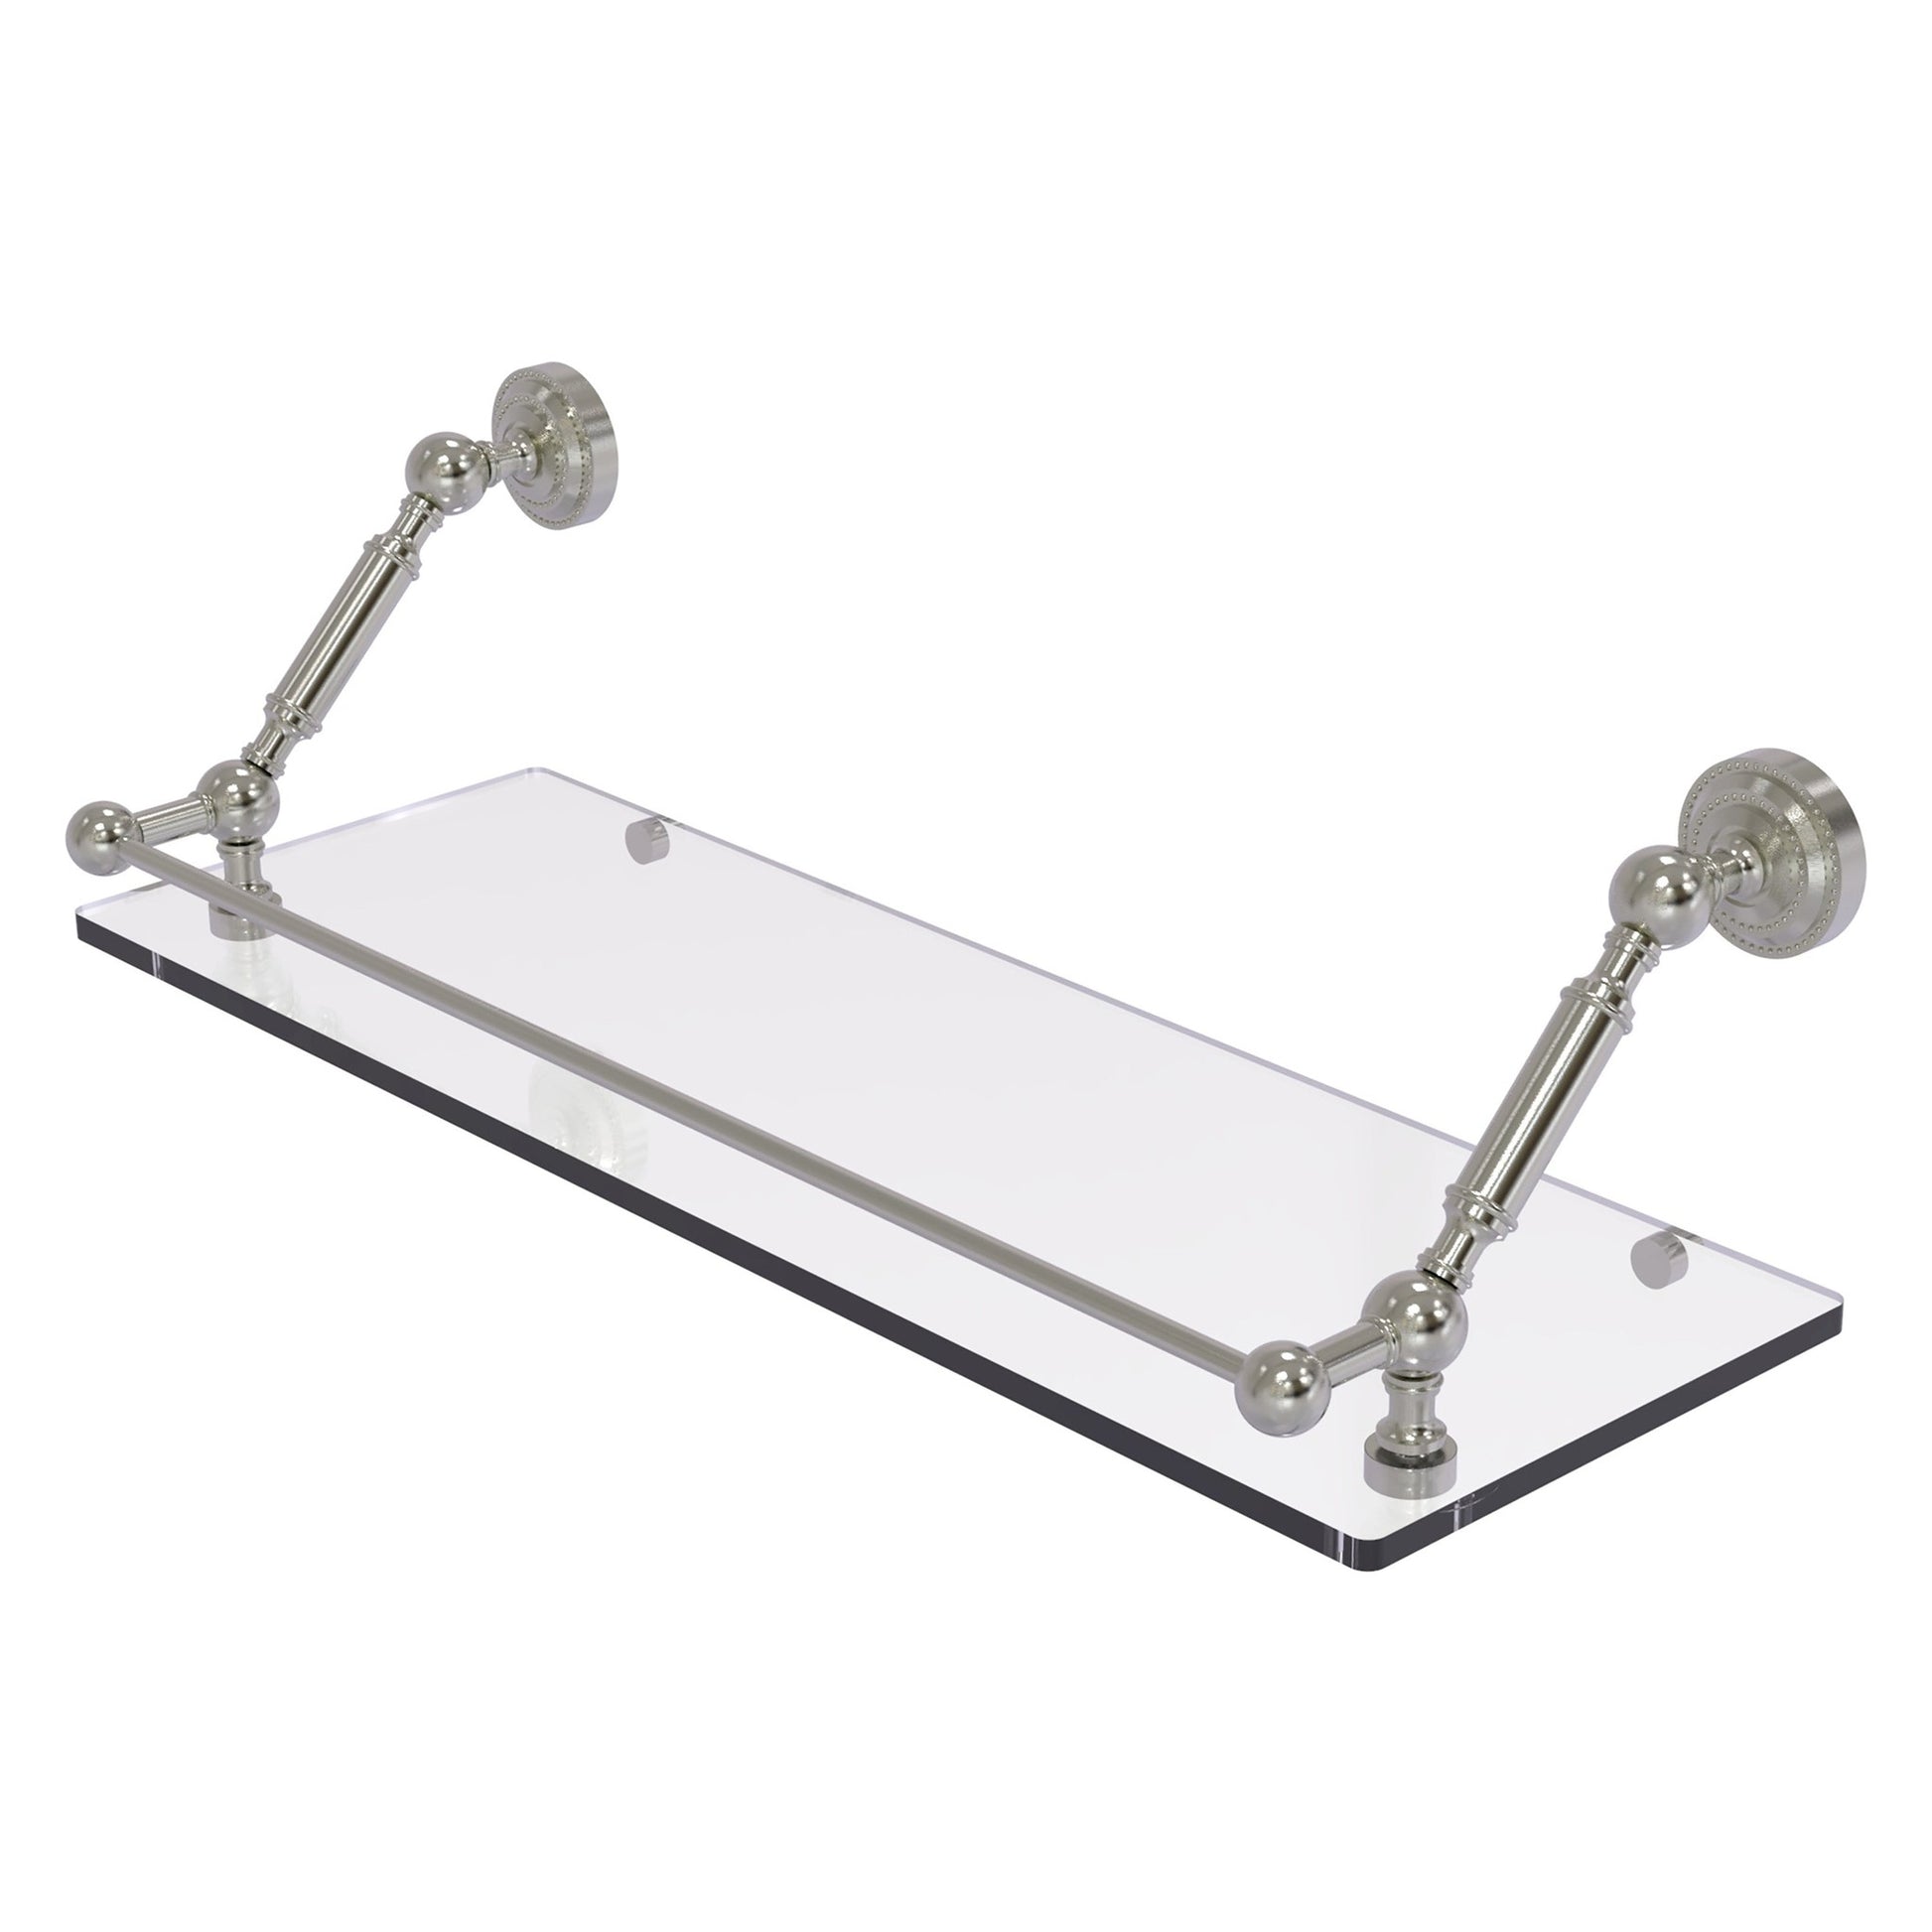 Allied Brass Que New Satin Brass Wall Mount Tempered Glass Bathroom Shelf  with Gallery Rail